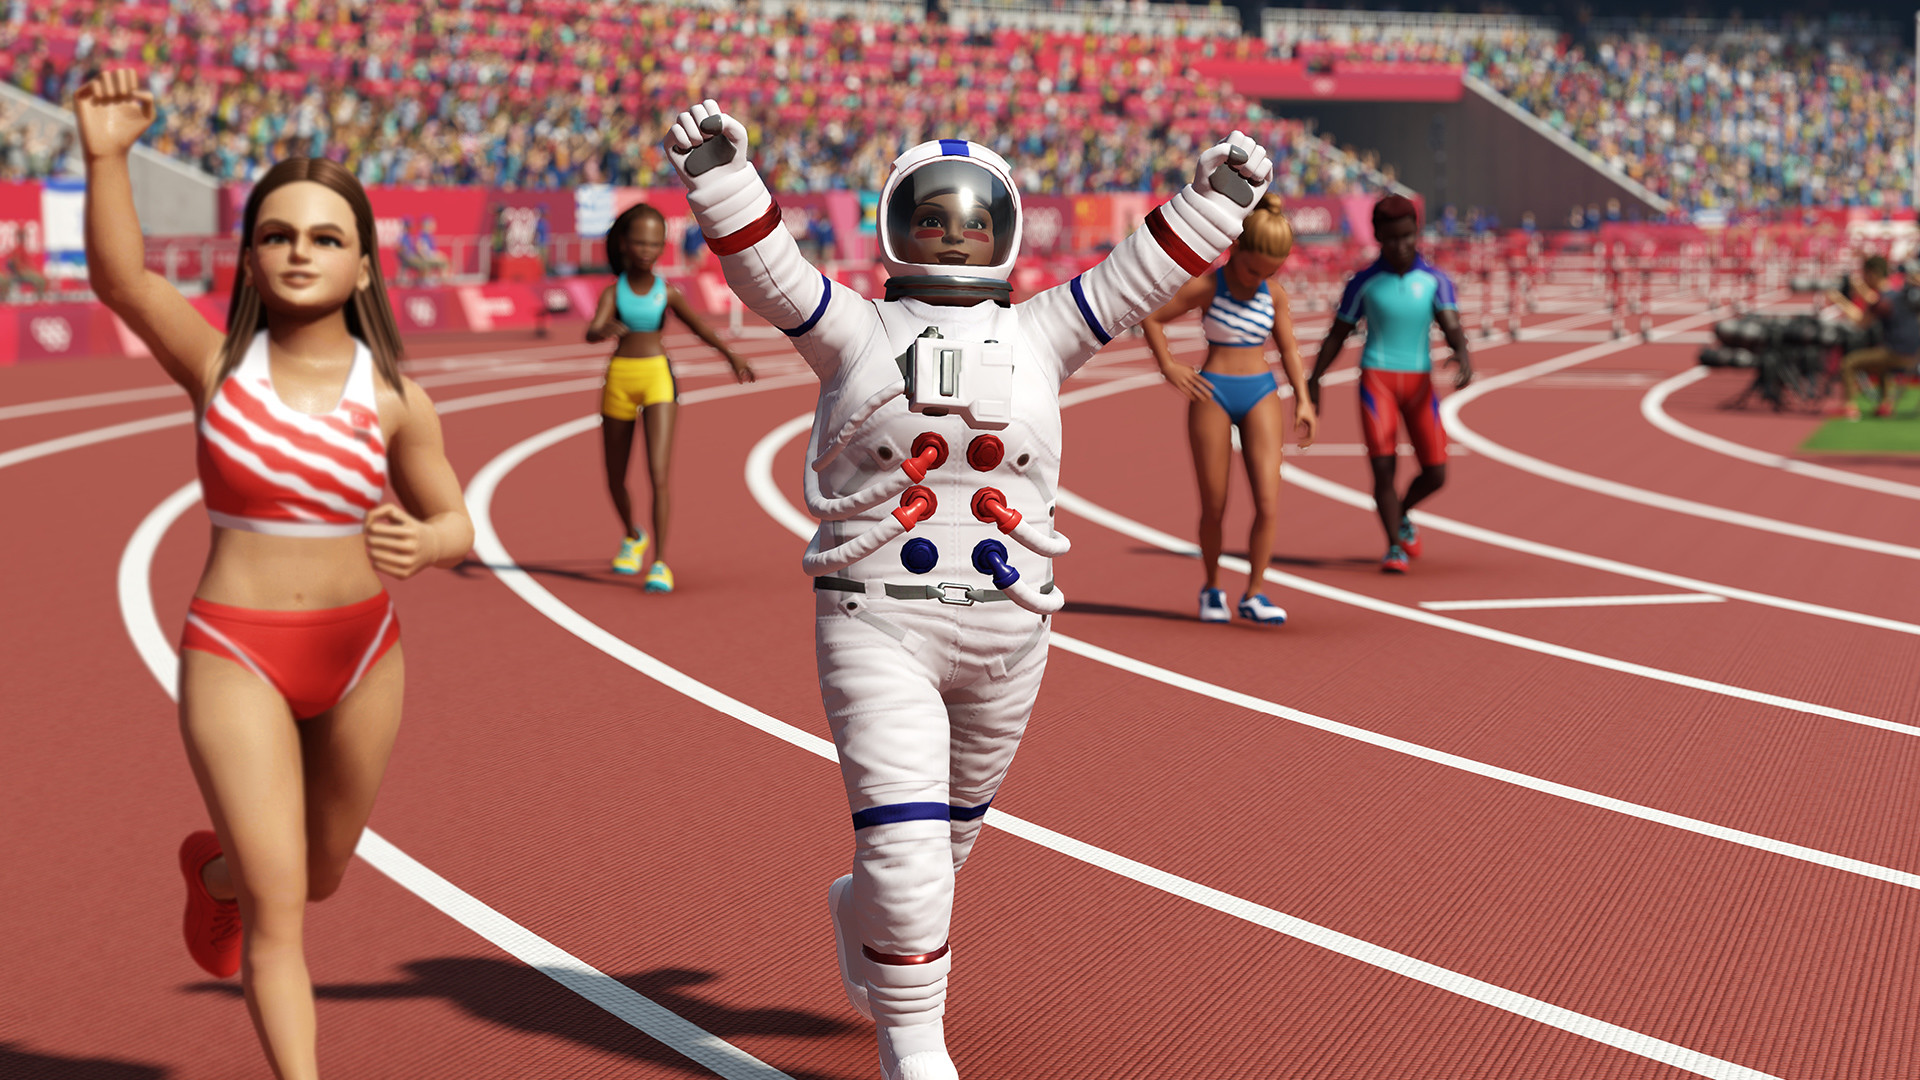 Olympic Games Tokyo 2020 - The Official Video Game EU Steam CD Key 9.45$